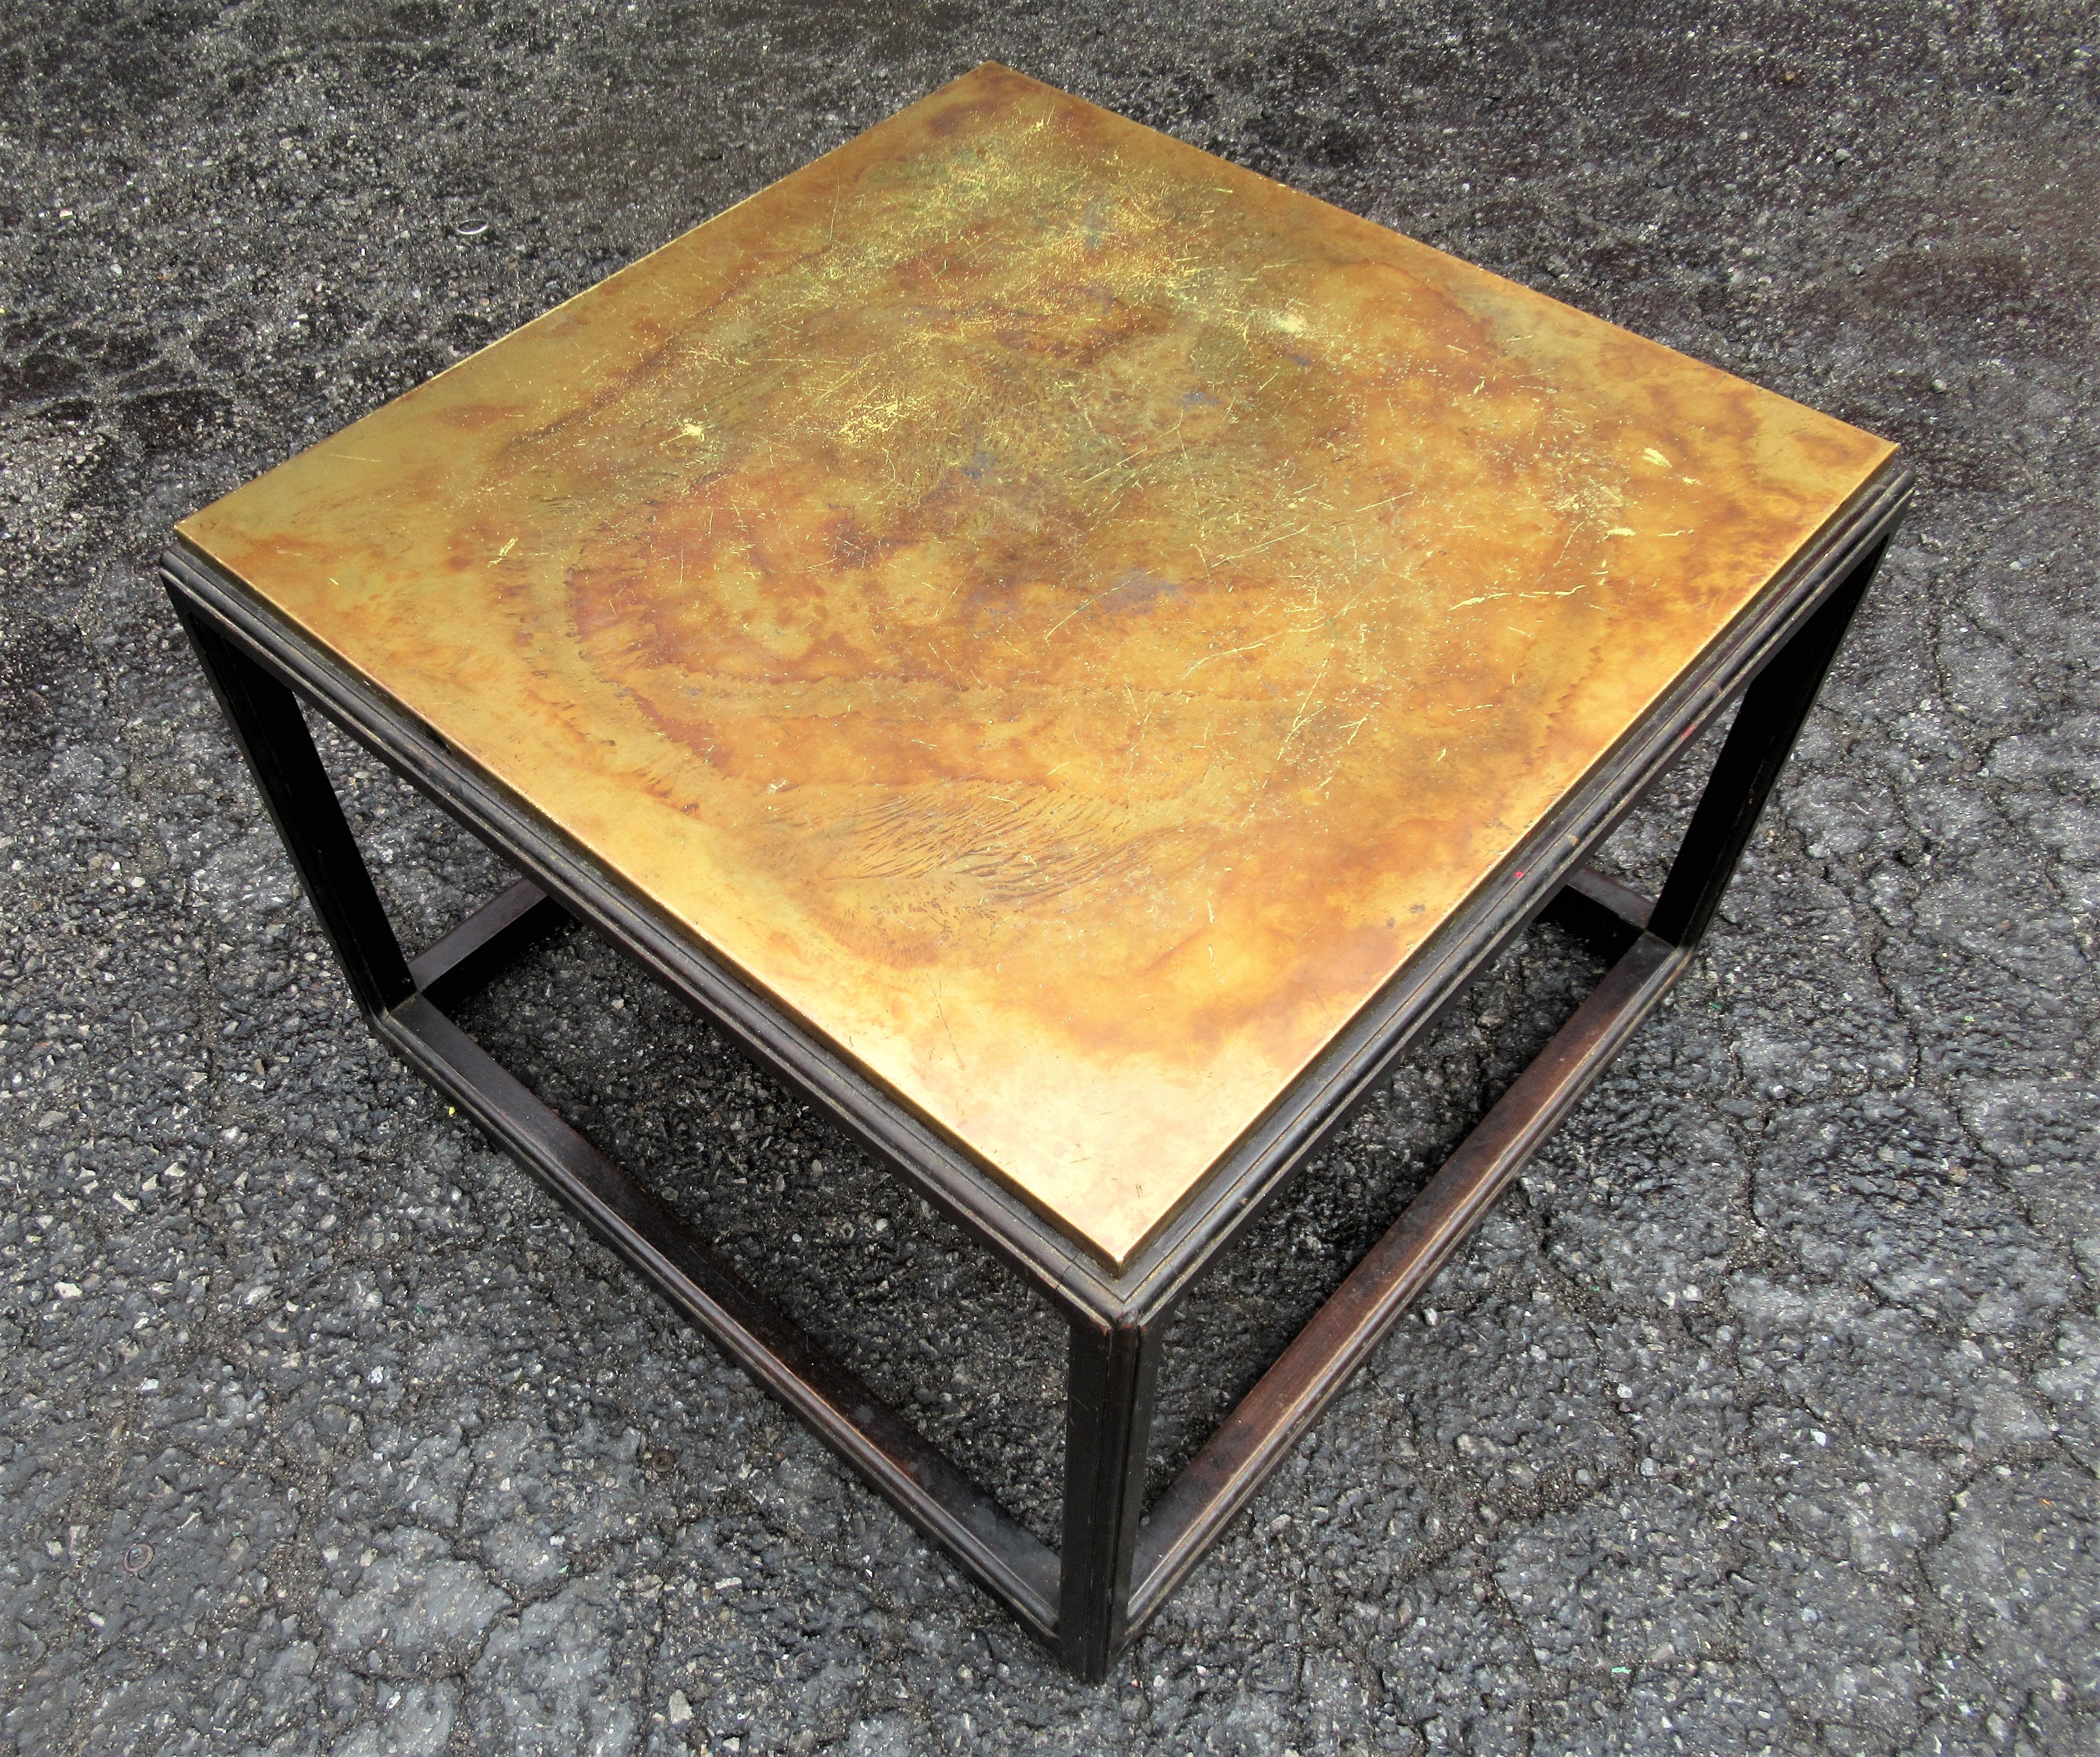 Asian modern style square coffee table with walnut base in partially ebonized stain finish and original copper top. Attributed to or in the style of John Stuart Inc. furniture retailers. Beautiful simple timeless design. Look at all pictures and